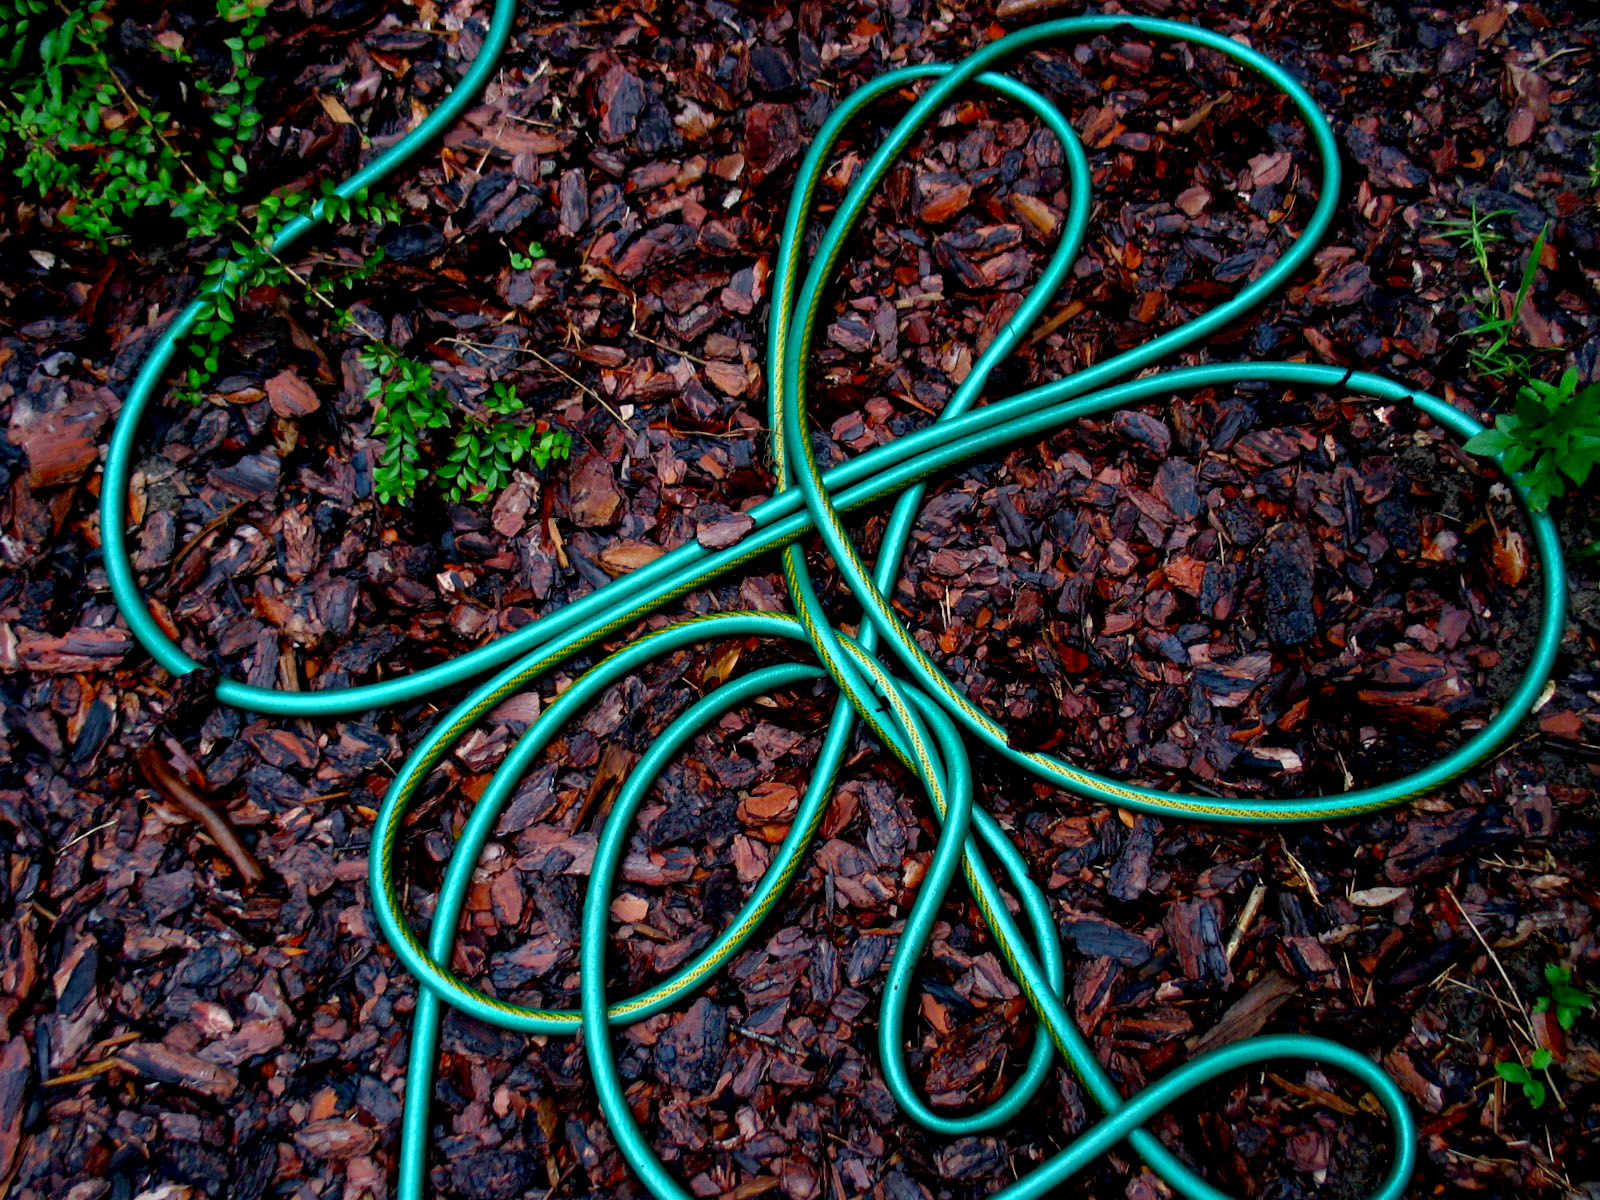 an old hose laying on the ground near some plants